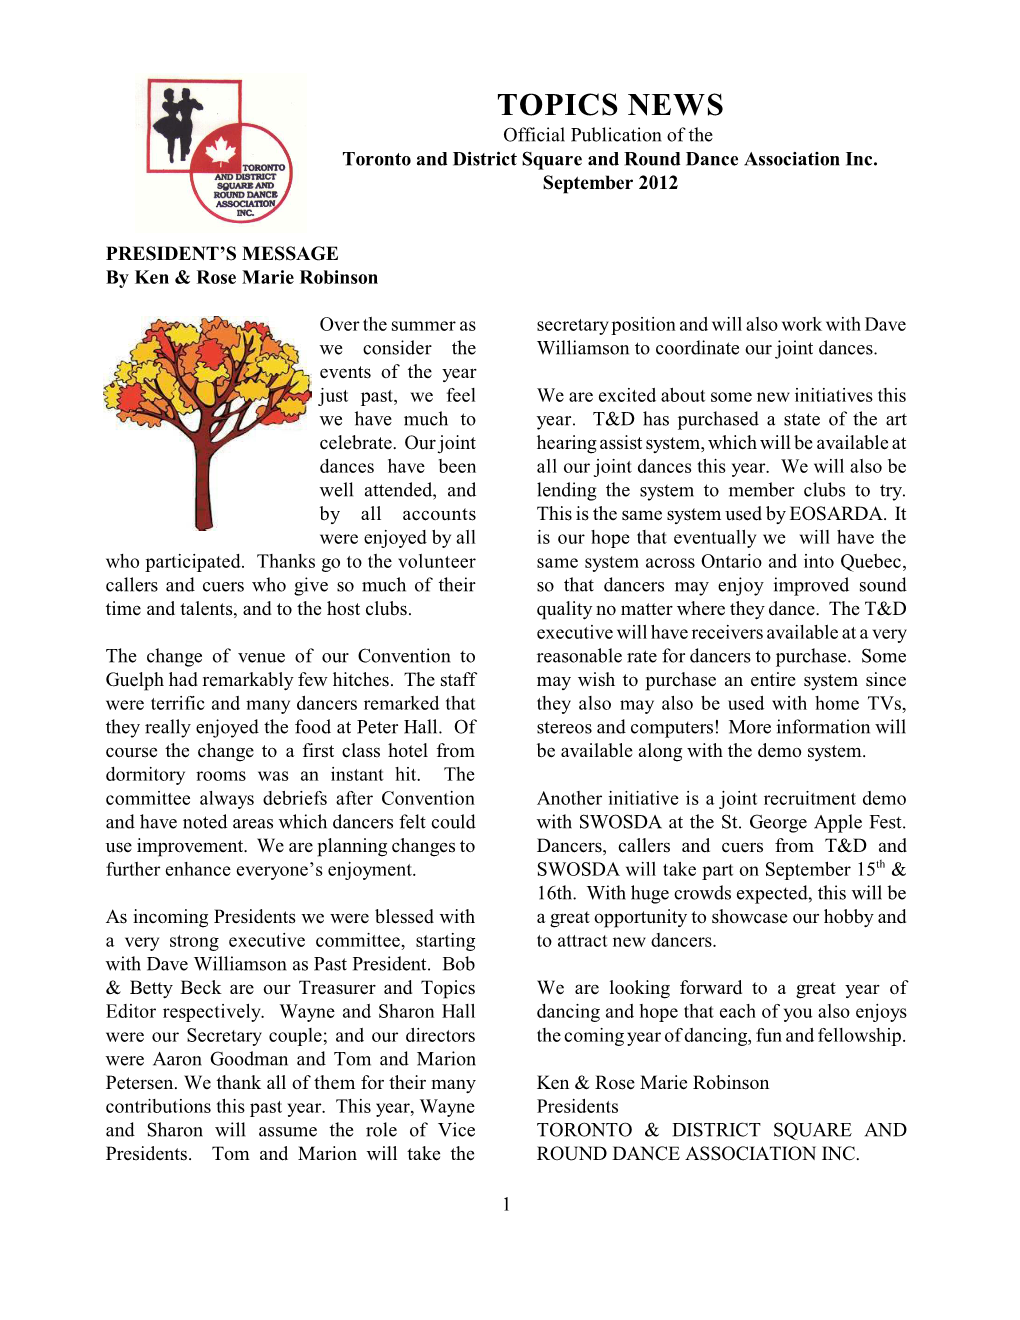 TOPICS NEWS Official Publication of the Toronto and District Square and Round Dance Association Inc